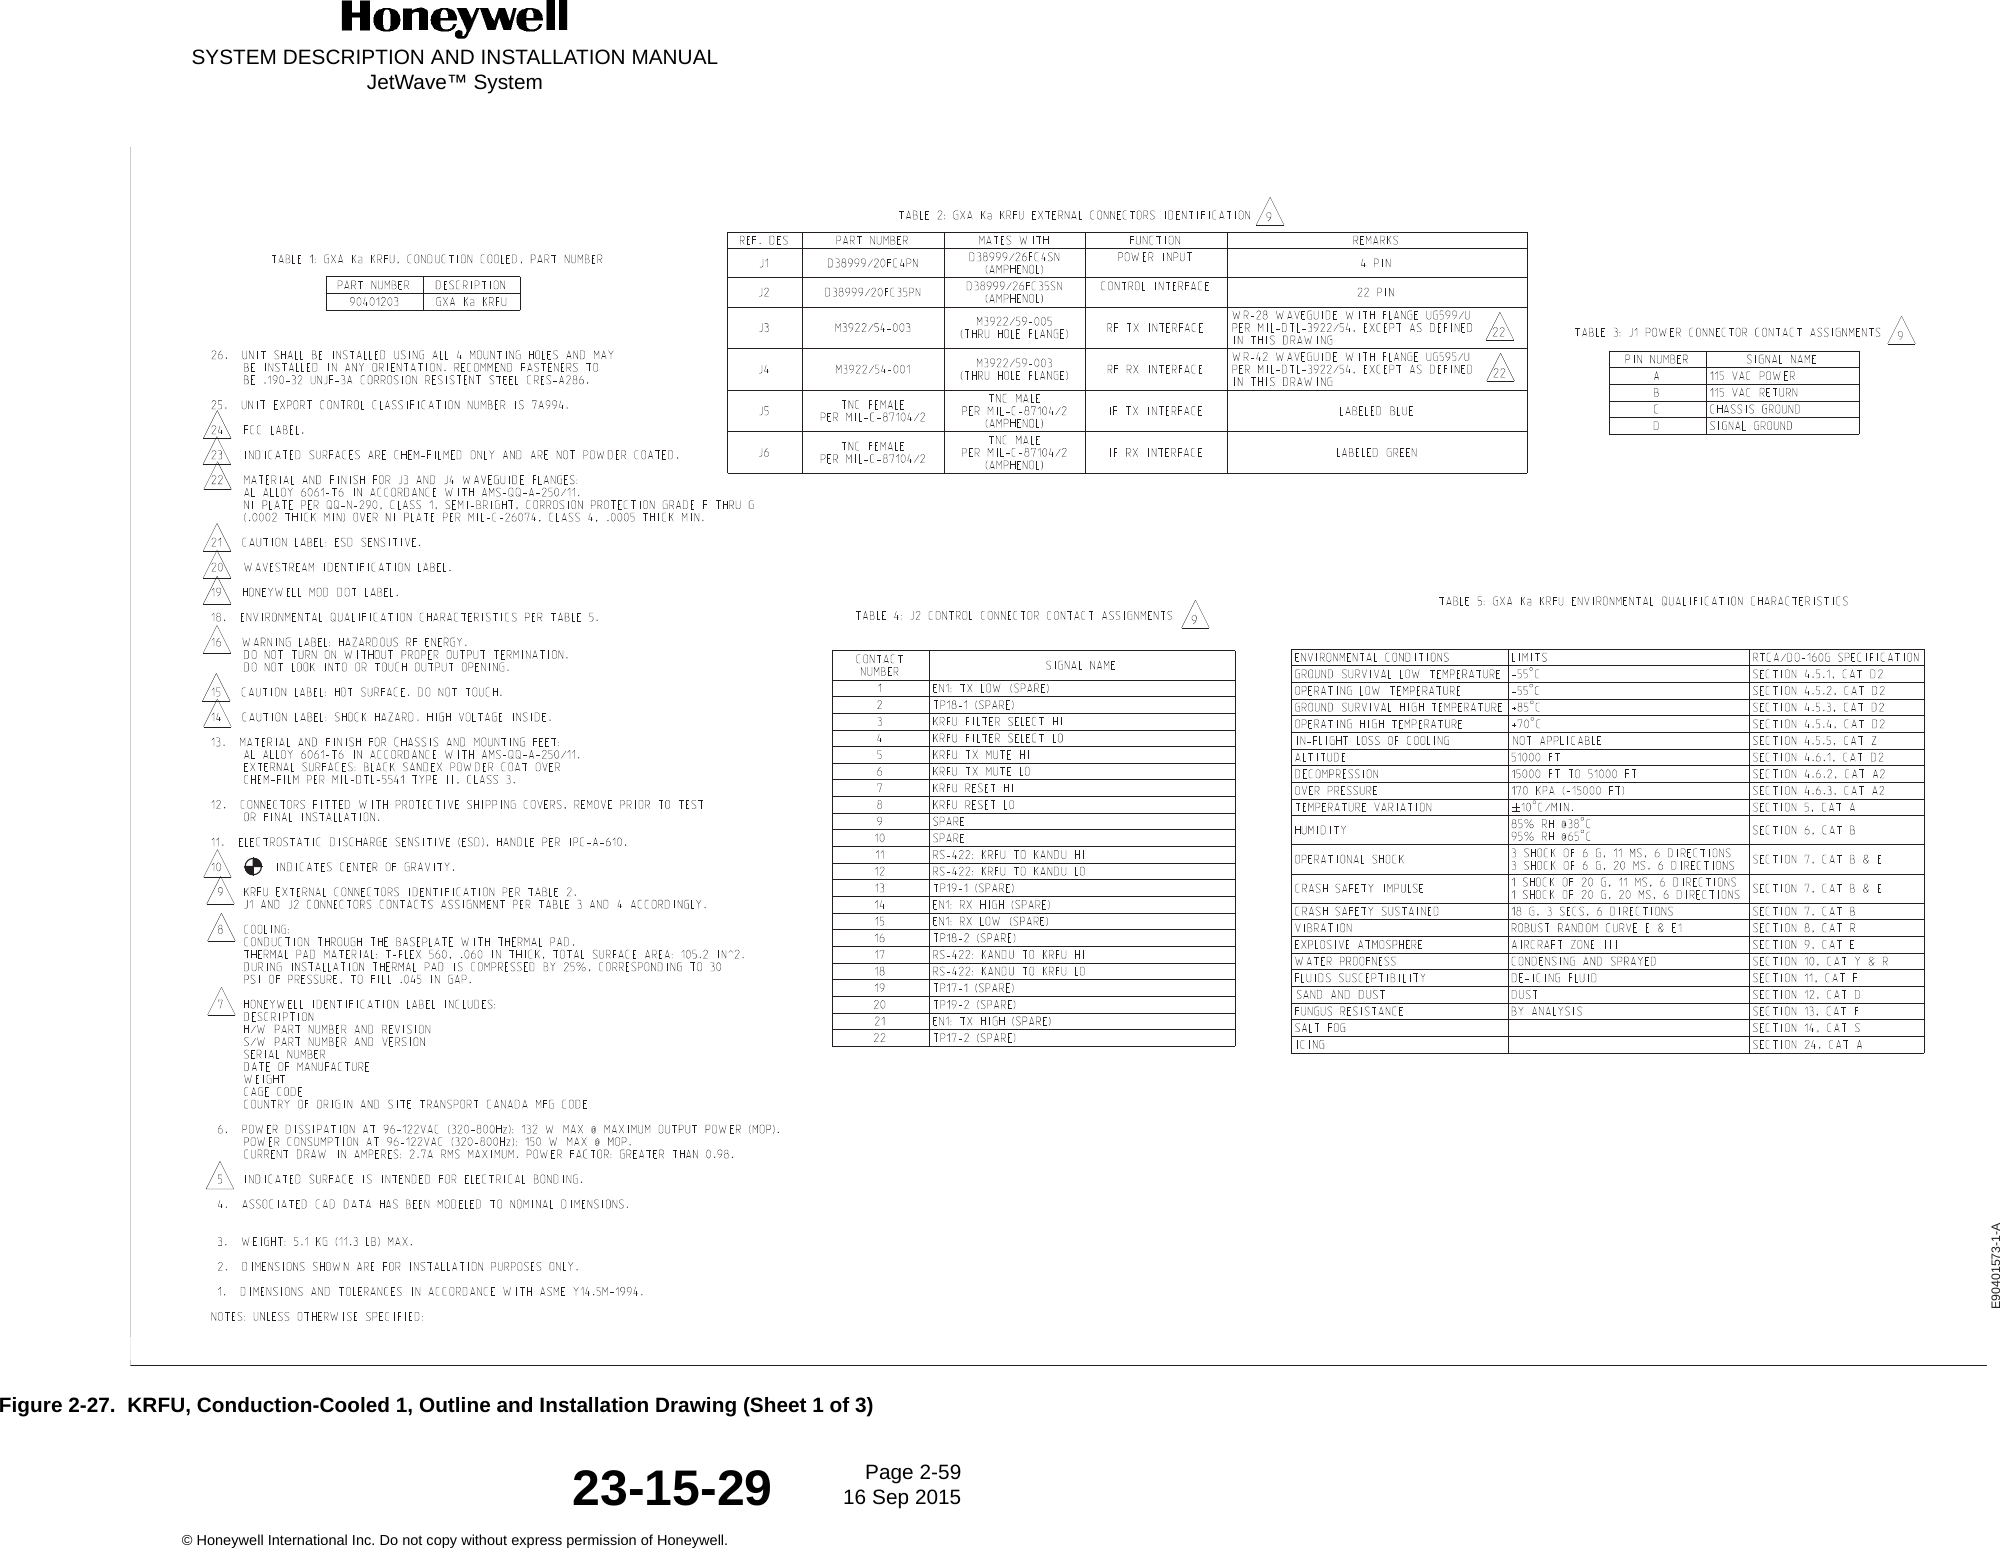 SYSTEM DESCRIPTION AND INSTALLATION MANUALJetWave™ SystemPage 2-59 16 Sep 2015© Honeywell International Inc. Do not copy without express permission of Honeywell.23-15-29Figure 2-27.  KRFU, Conduction-Cooled 1, Outline and Installation Drawing (Sheet 1 of 3)PRODUCTION - Release - 15 Aug 2014 13:44:15 MST - Printed on 26 Aug 2014E90401573-1-A